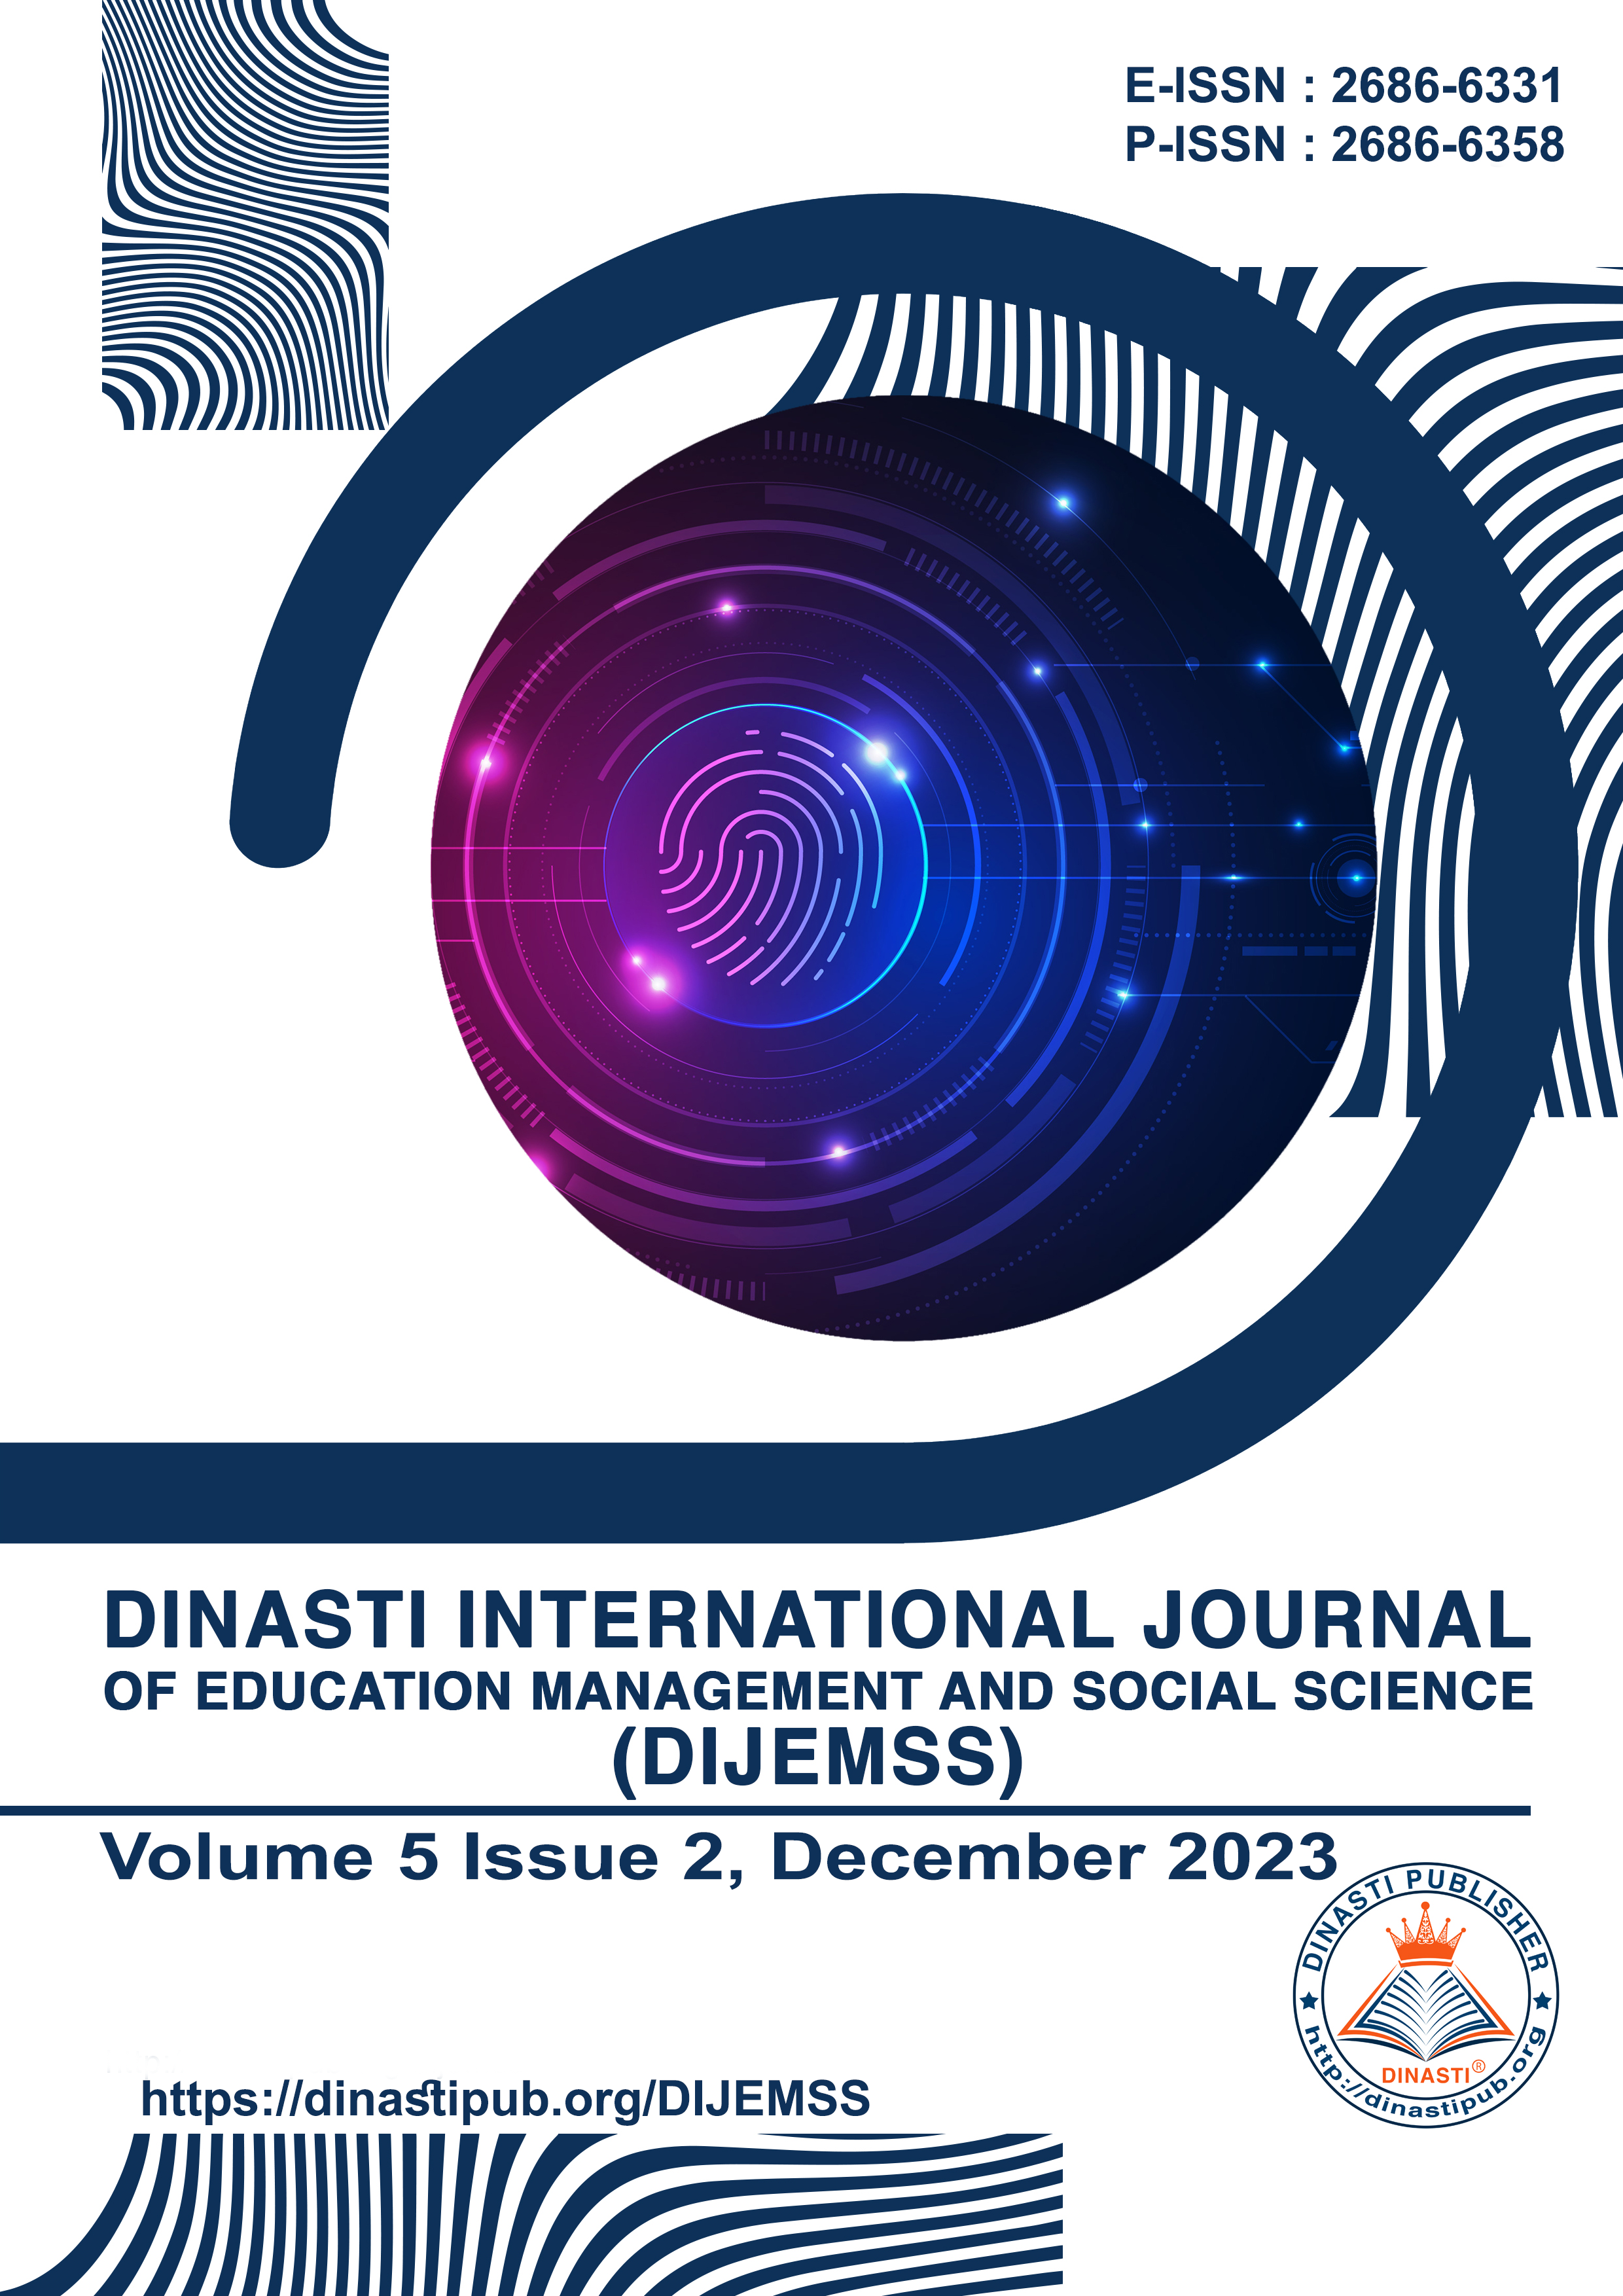 					View Vol. 5 No. 2 (2023): Dinasti International Journal of Education Management and Social Science (December 2023 - January 2024)
				